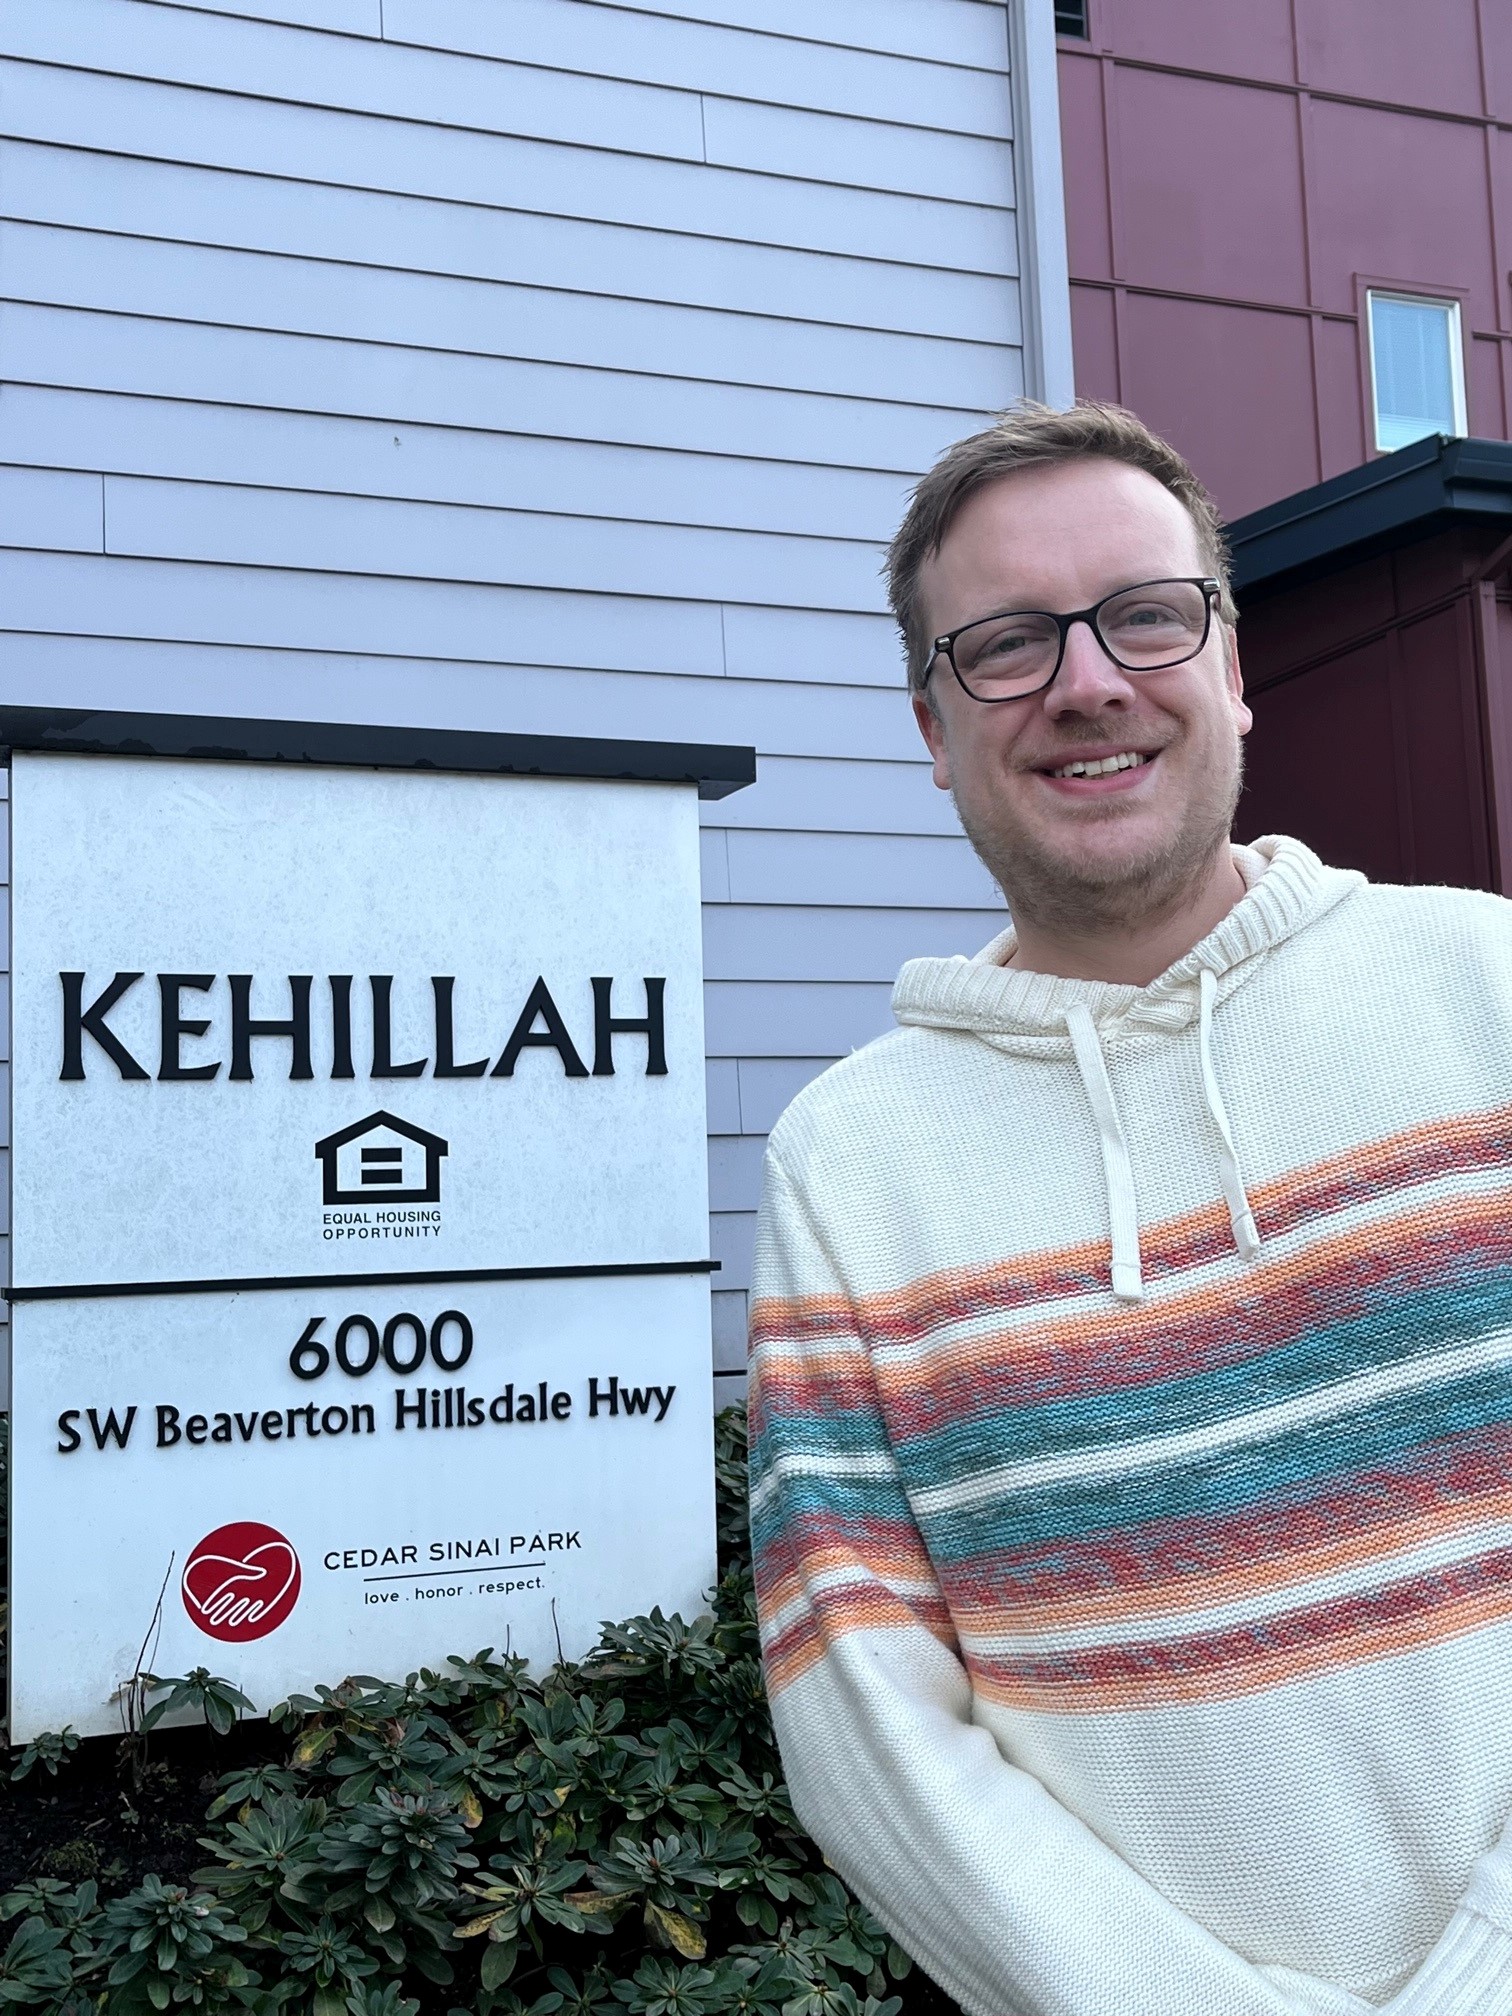 Manager Loves to Cook and Care for Cedar Sinai Park's Kehillah Residents